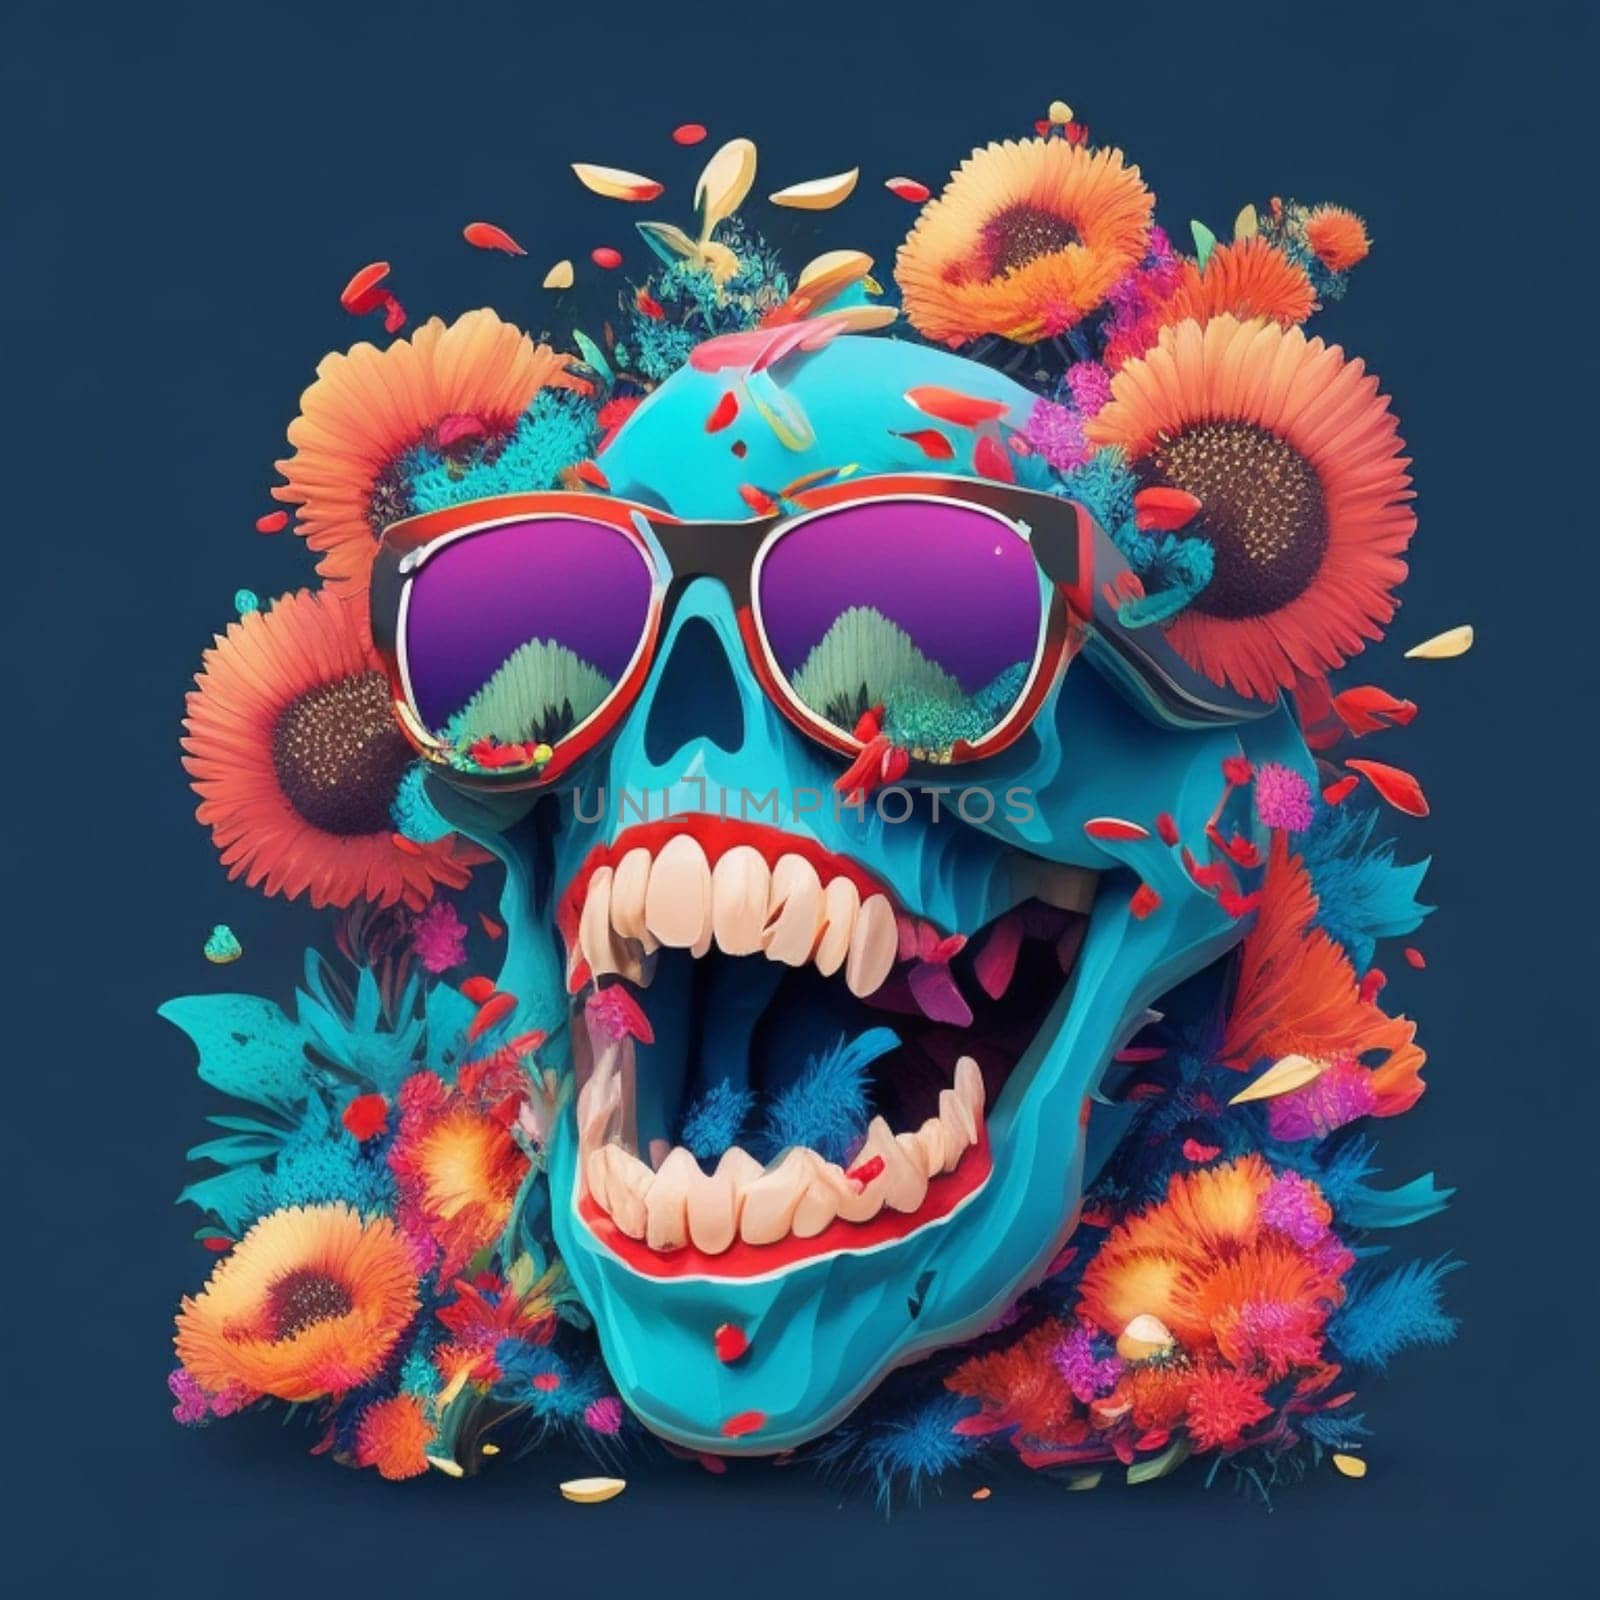 skull smile 3d illustration render happy horro mood wearing sunglasses surrounded by flowers by verbano